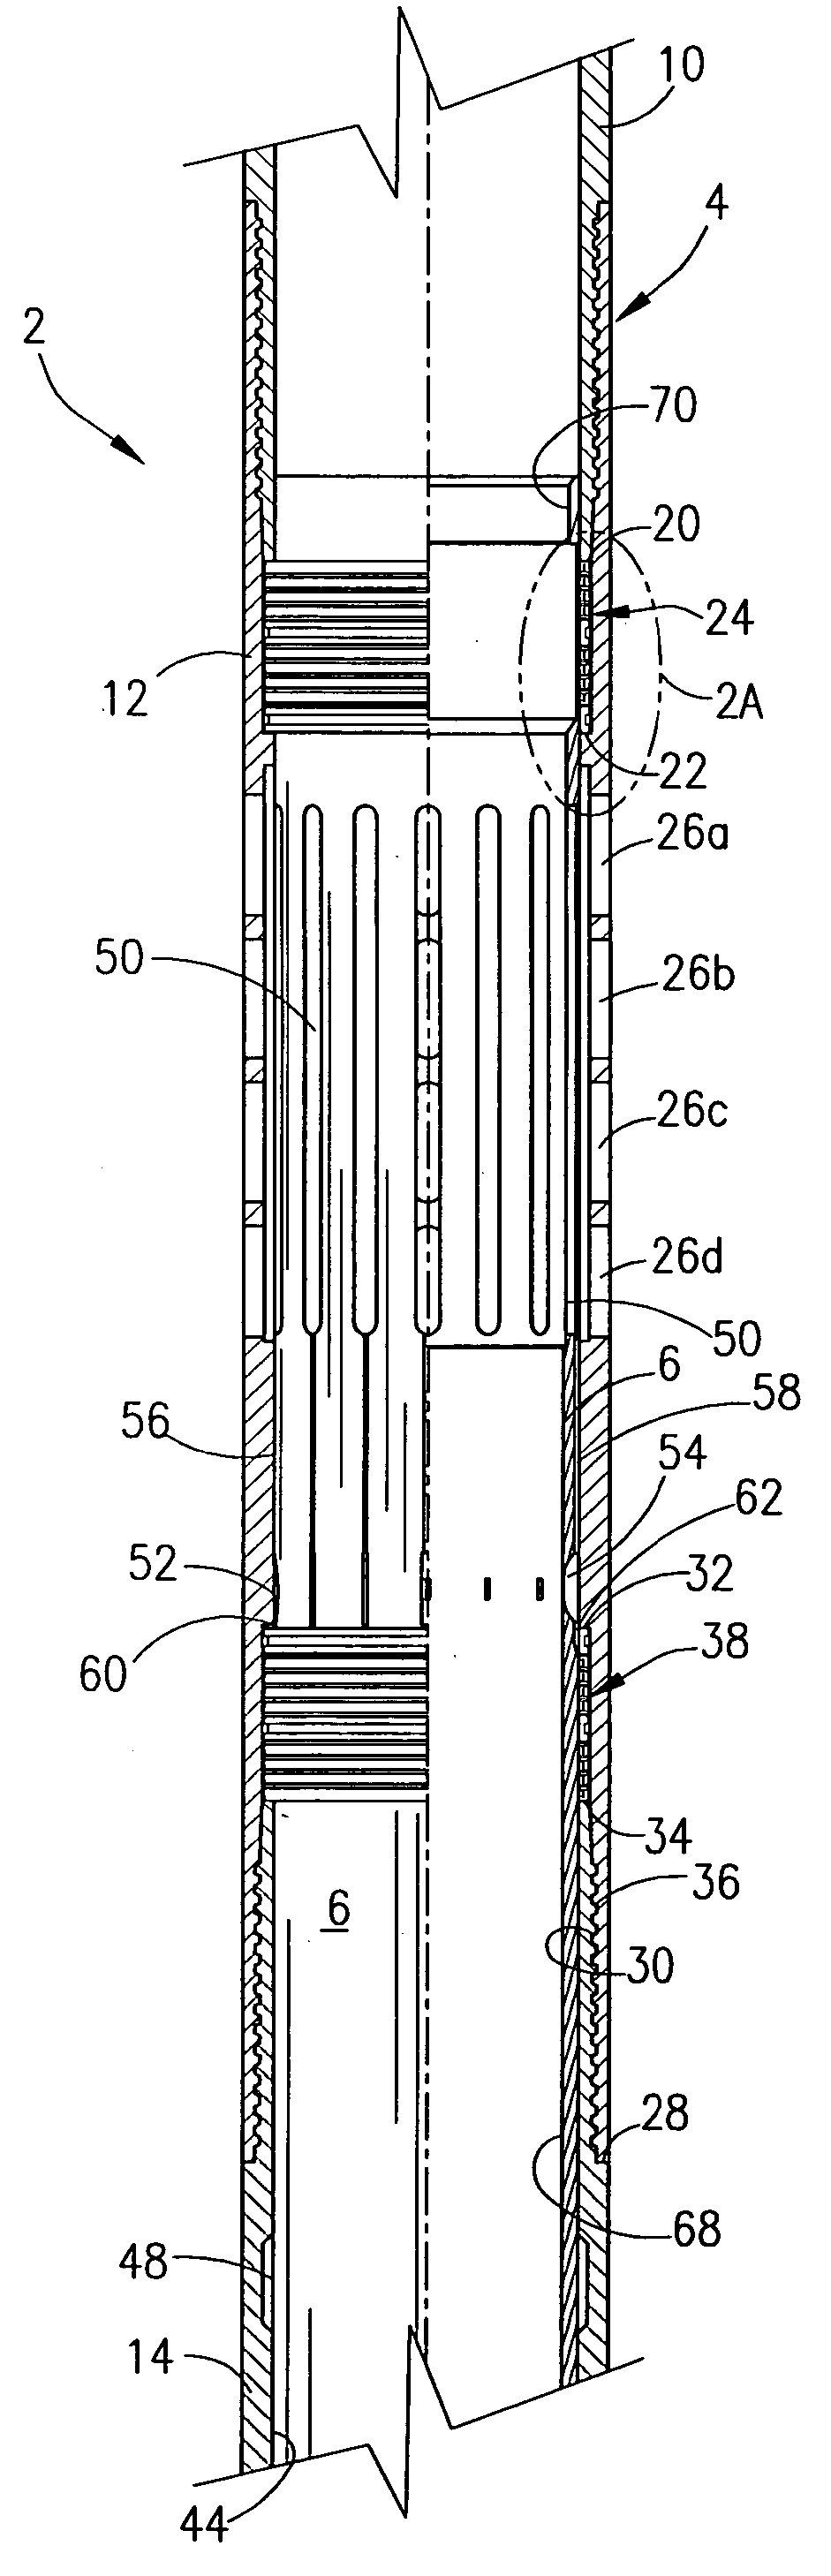 Valve apparatus with seal assembly